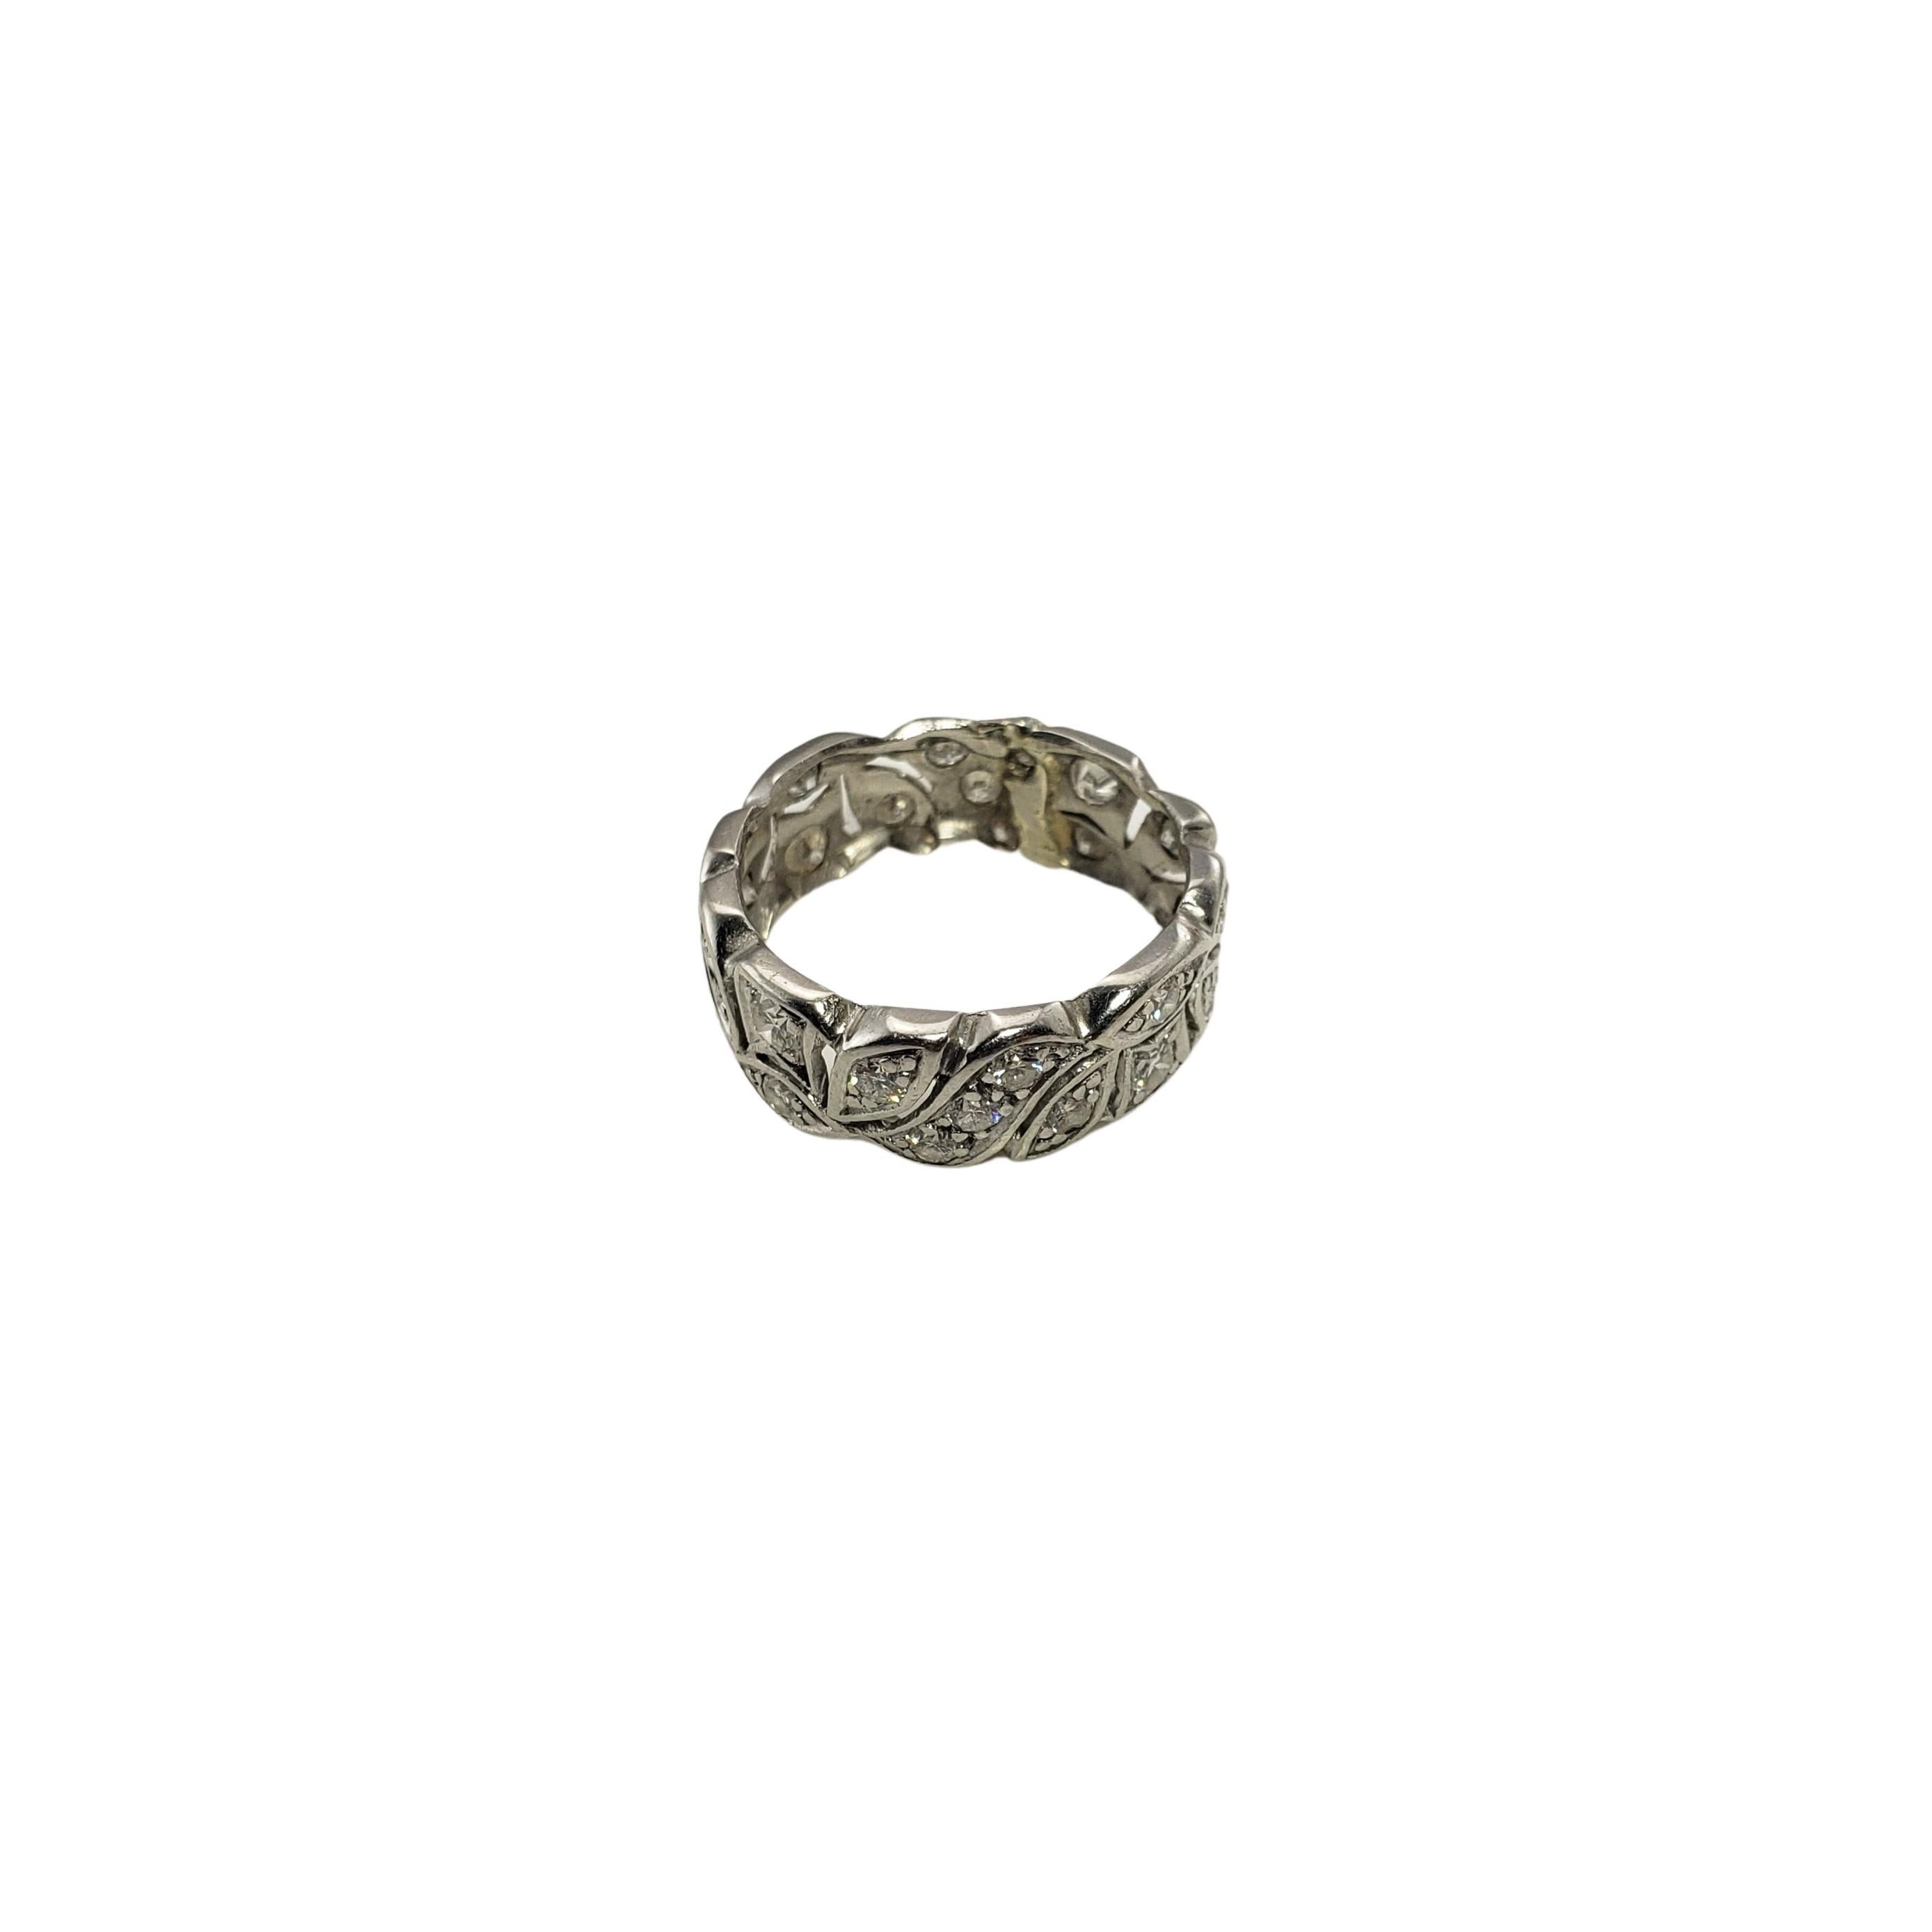 Vintage 14 Karat White Gold and Diamond Ring Size 6.25-

This sparkling band features 28 round brilliant cut diamonds set in beautifully detailed 14K white gold. Width: 7 mm.

Approximate total diamond weight: .45 ct.

Diamond color: G

Diamond